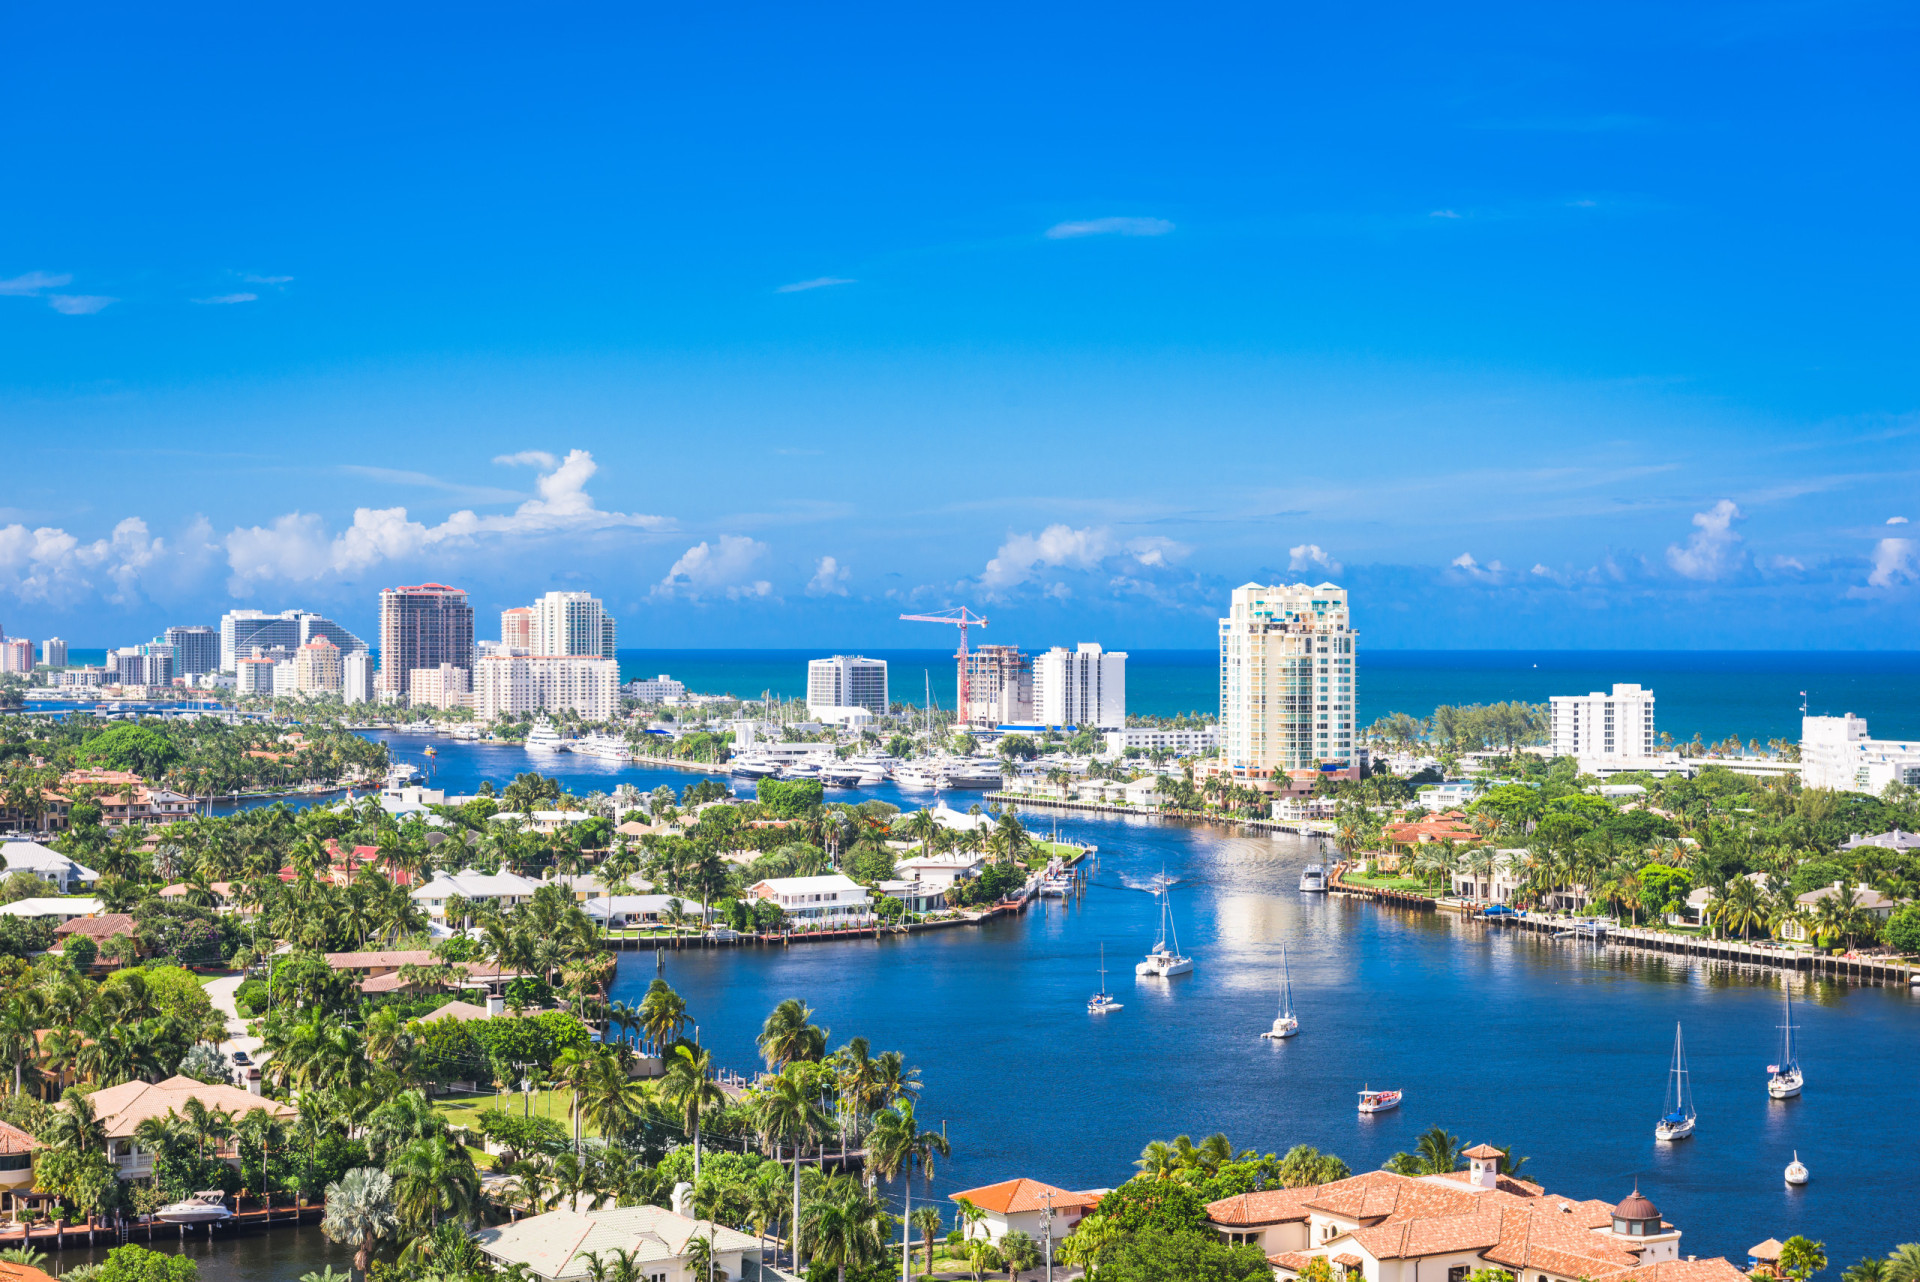 <p>Fort Lauderdale scores 61.3 on the rent index. It's famed for its boating canals and splendid beaches, making it a sought-after location for sun-seekers and yacht enthusiasts alike.</p><p><a href="https://www.msn.com/en-in/community/channel/vid-7xx8mnucu55yw63we9va2gwr7uihbxwc68fxqp25x6tg4ftibpra?cvid=94631541bc0f4f89bfd59158d696ad7e">Follow us and access great exclusive content every day</a></p>